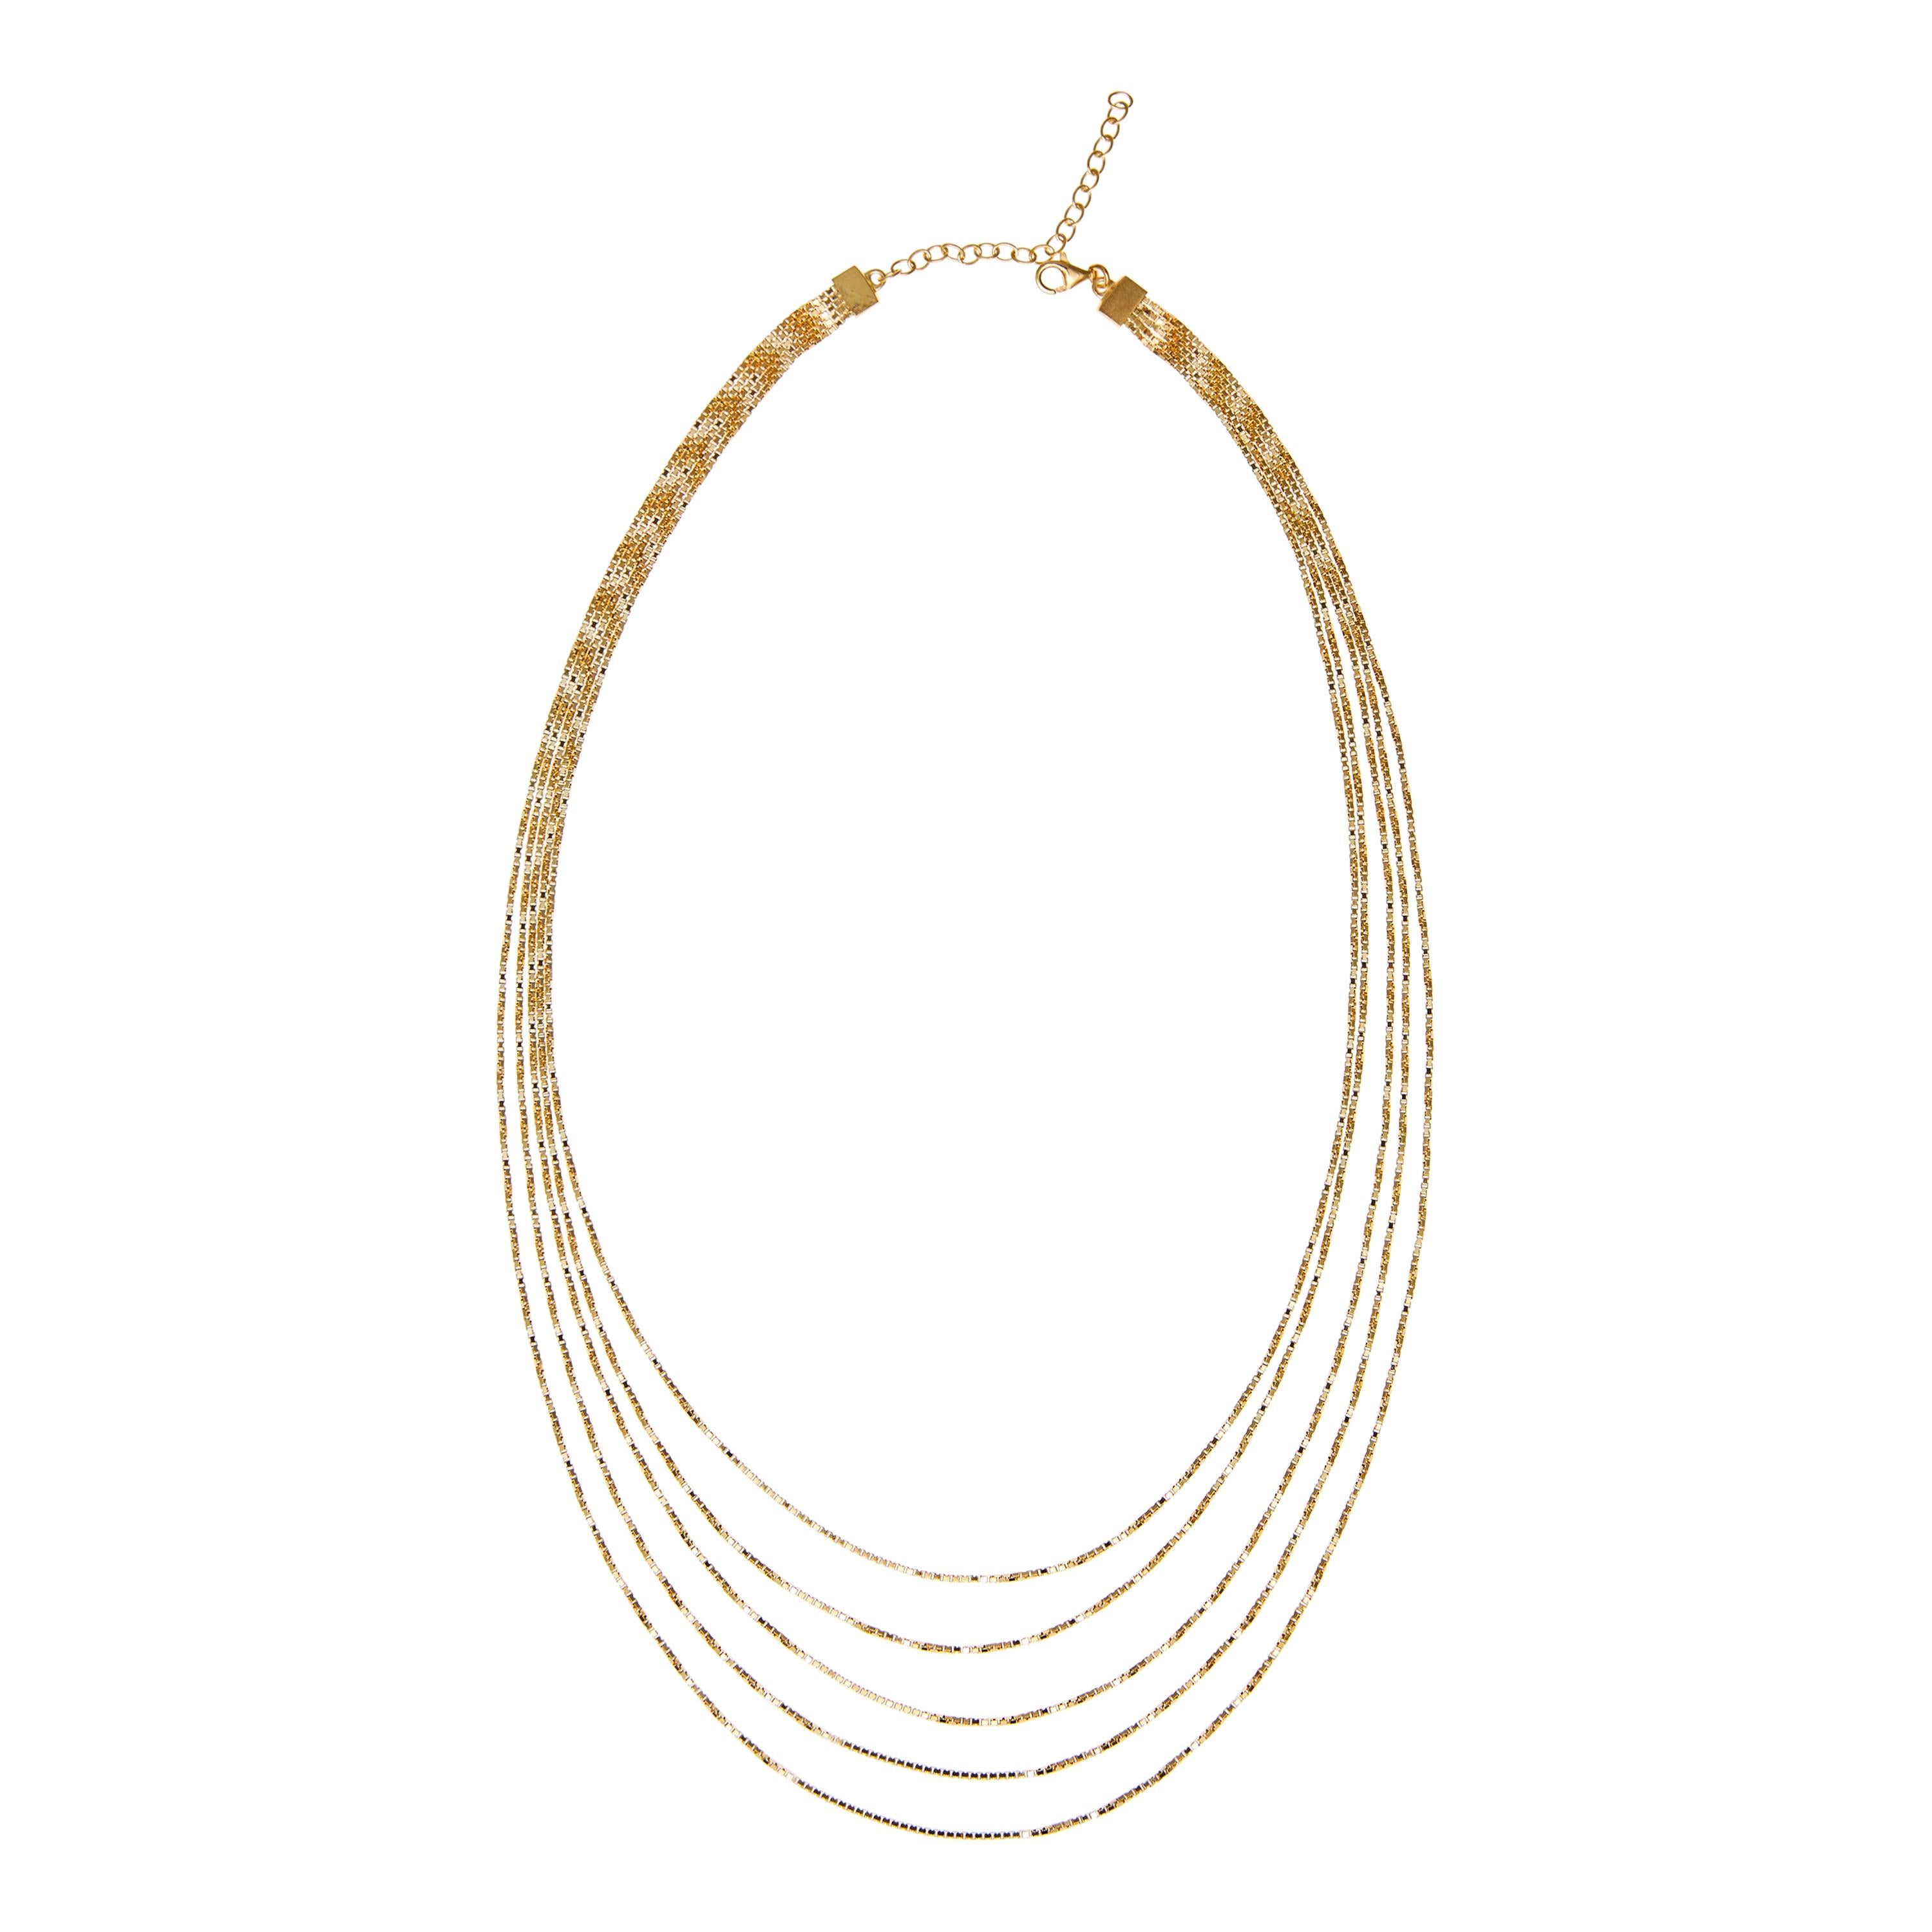 Necklace Minimal Long Box Chain Shiny 18 Karat Gold-Plated Silver Greek For Sale